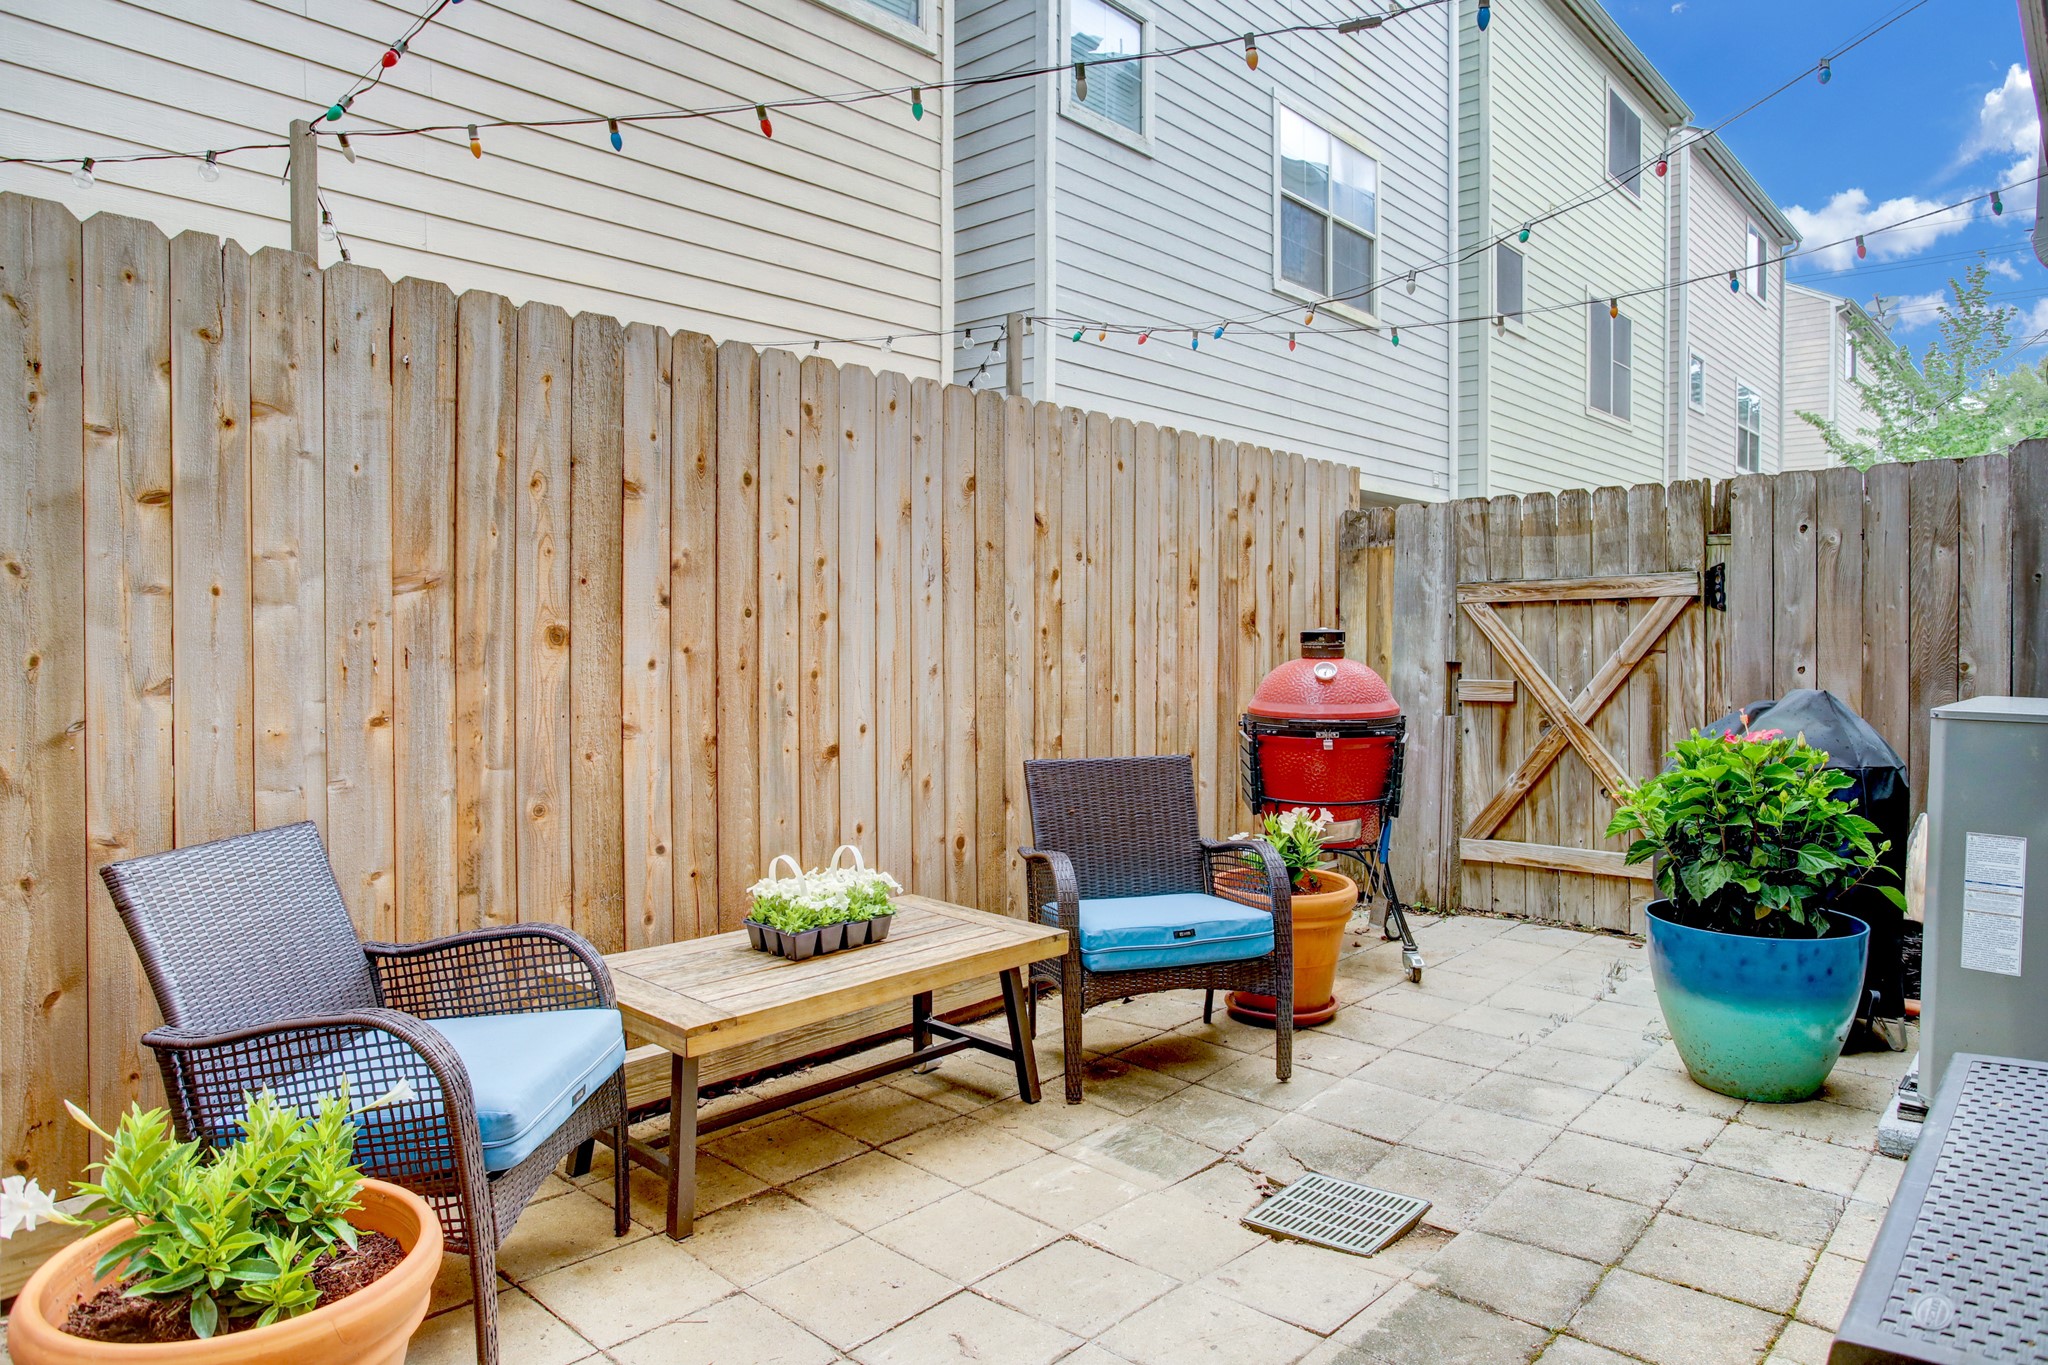 Enjoy your own private space to relax, play, entertain and grill!